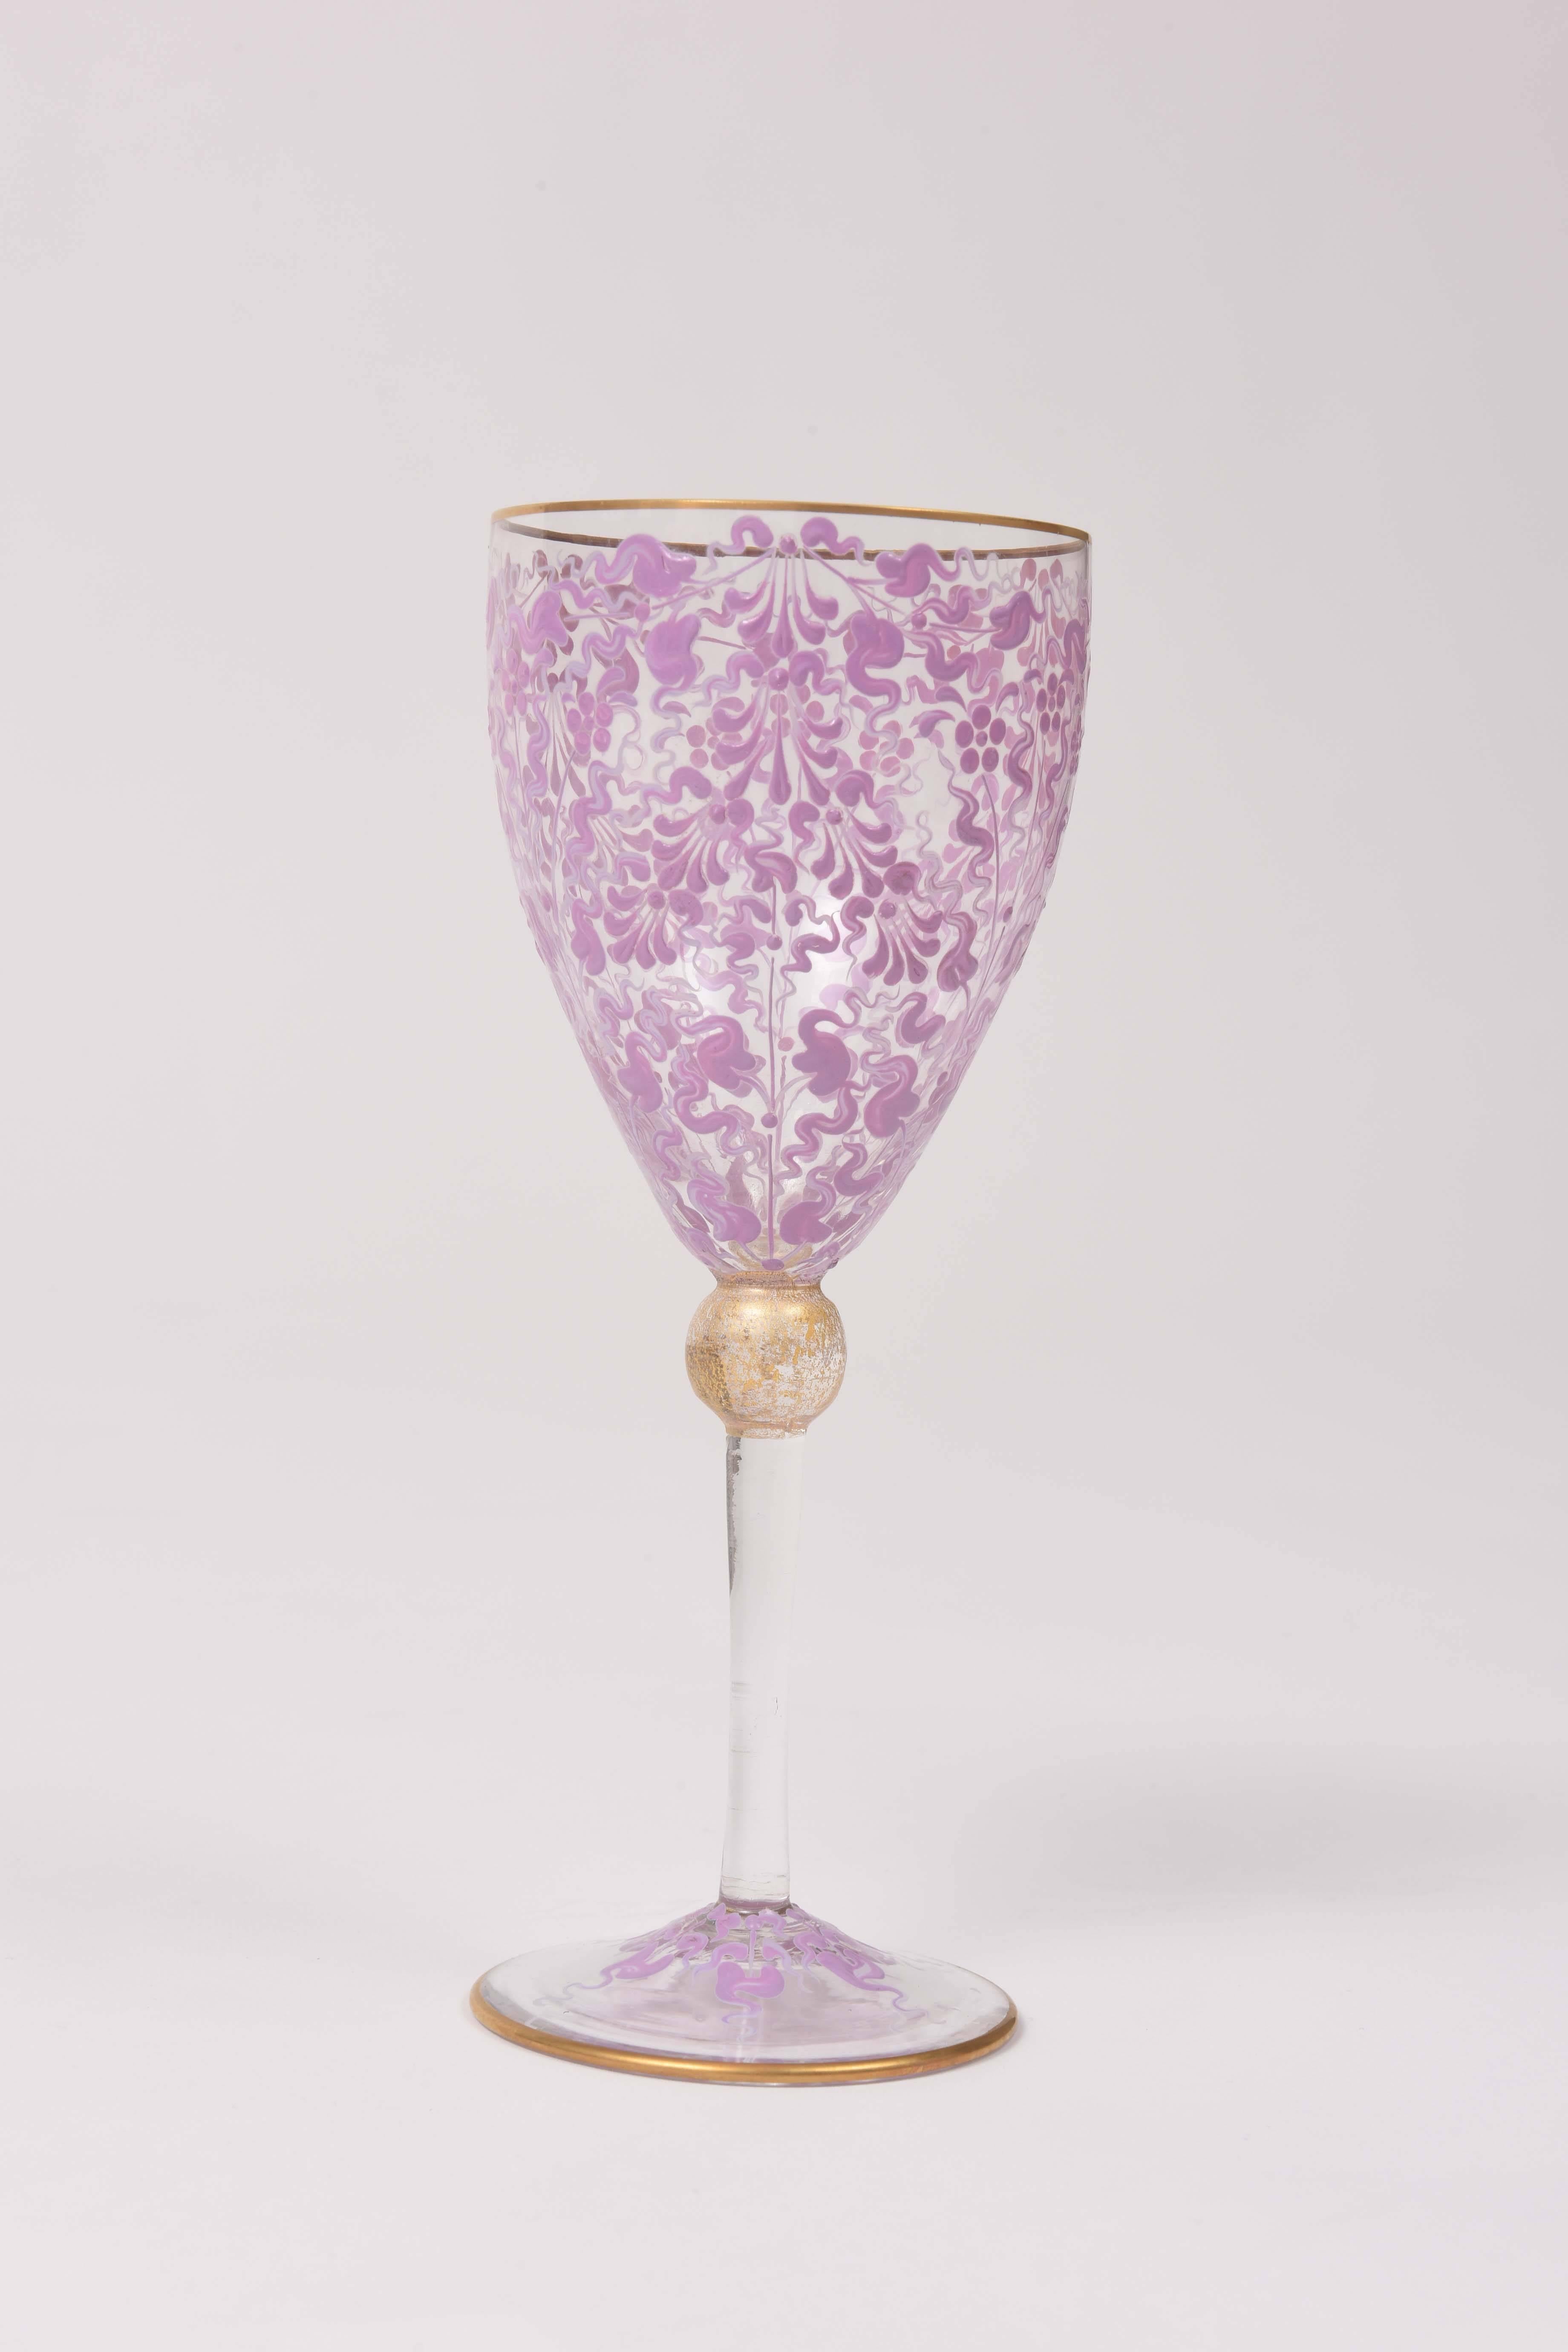 An exquisite set of 12 Venetian wine glasses that has been beautifully blown and features a double color pink hand enamel pattern on its bowl and stem. A nice gilded knob stem makes them a delight to hold and they have great balance. Trimmed on the